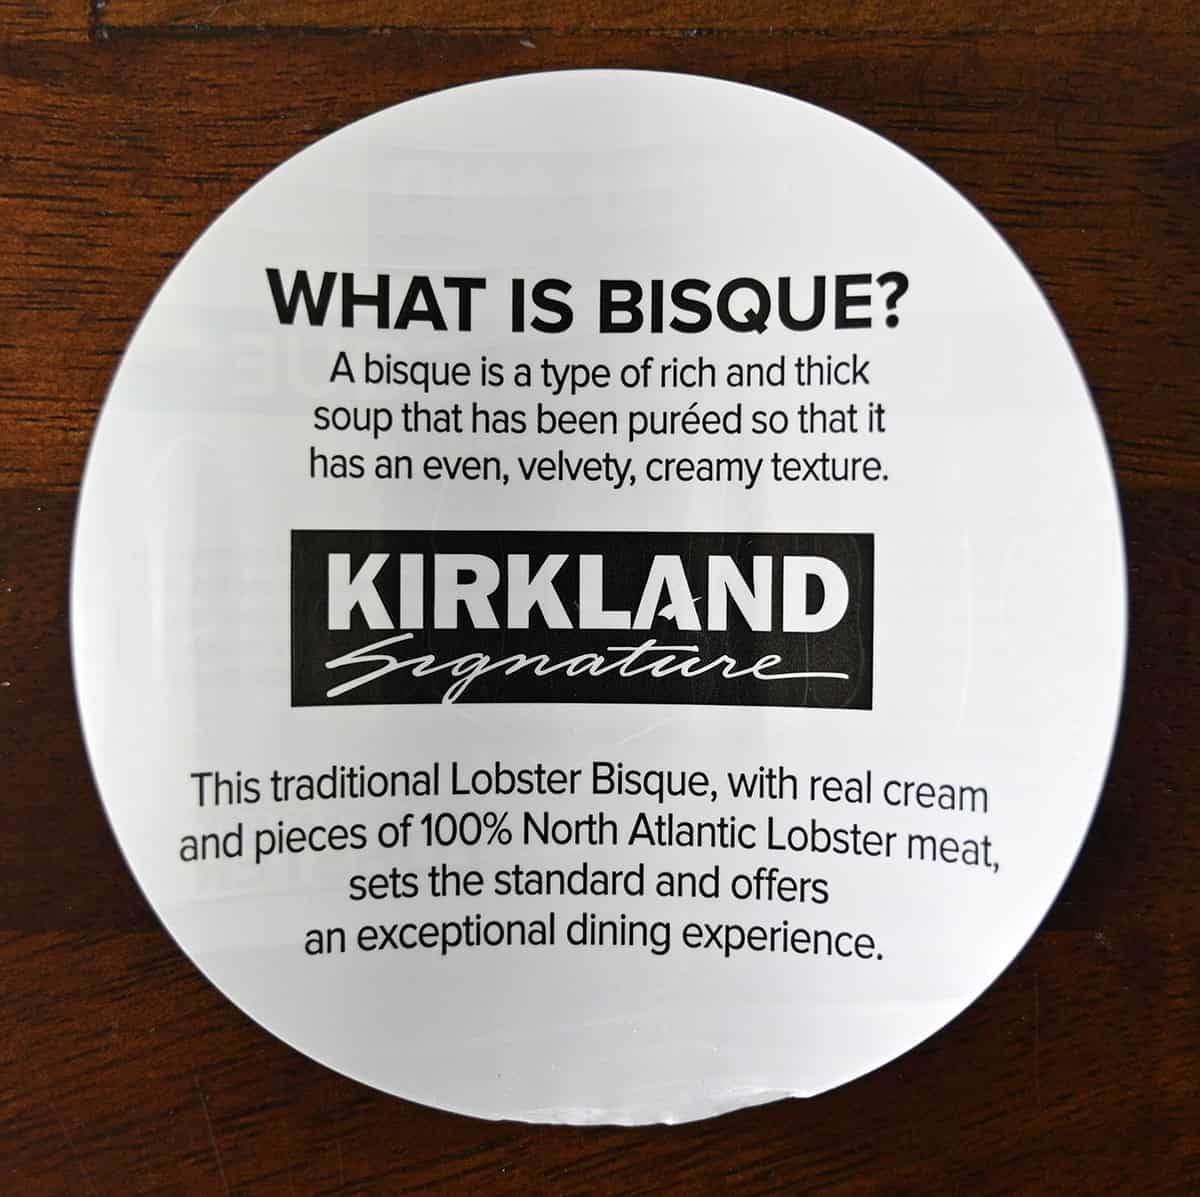 Image of a sticker that says "what is bisque" from the tub of soup.